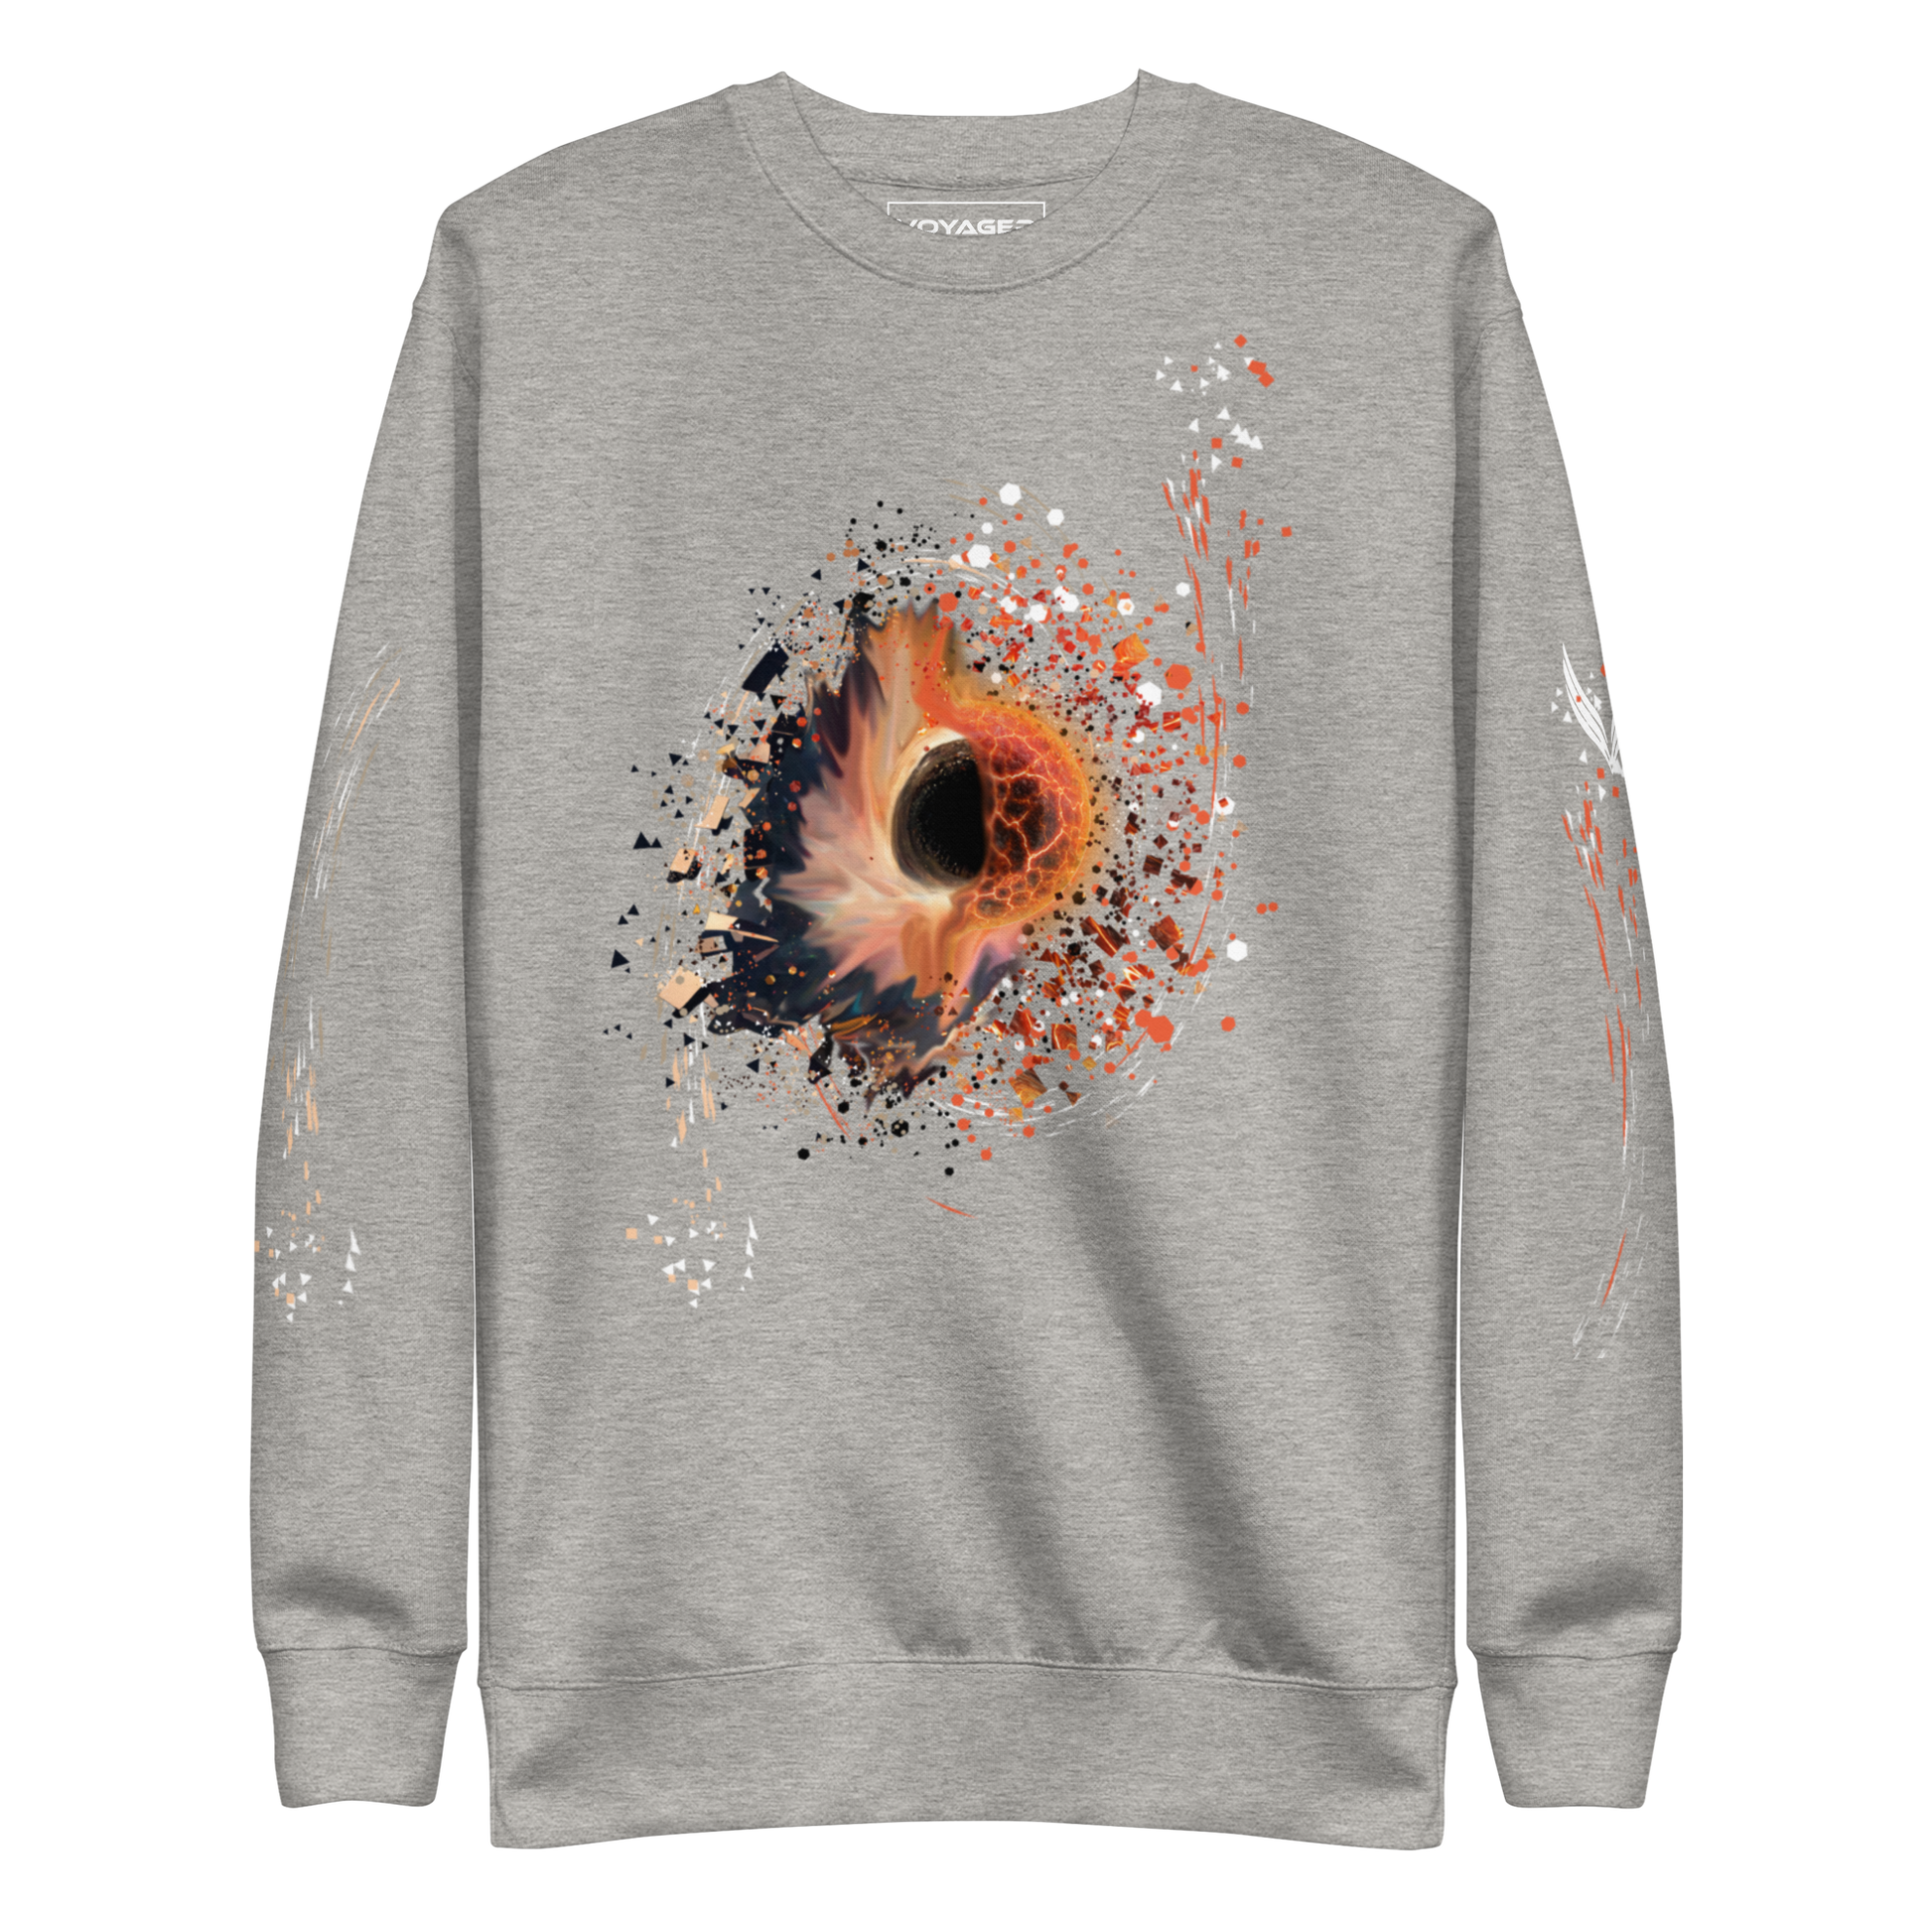 The Cosmic Synchronicity Sweatshirt: A Collaboration with Tim. On grey front,  The front image shows the beauty of the chaos that is our universe. Creation and destruction may appear to be opposite forces, yet when we allow ourselves to see the big picture, it becomes clear just how interconnected the two are. Even as one thing may come to an end, there is surely another that is born into being.  